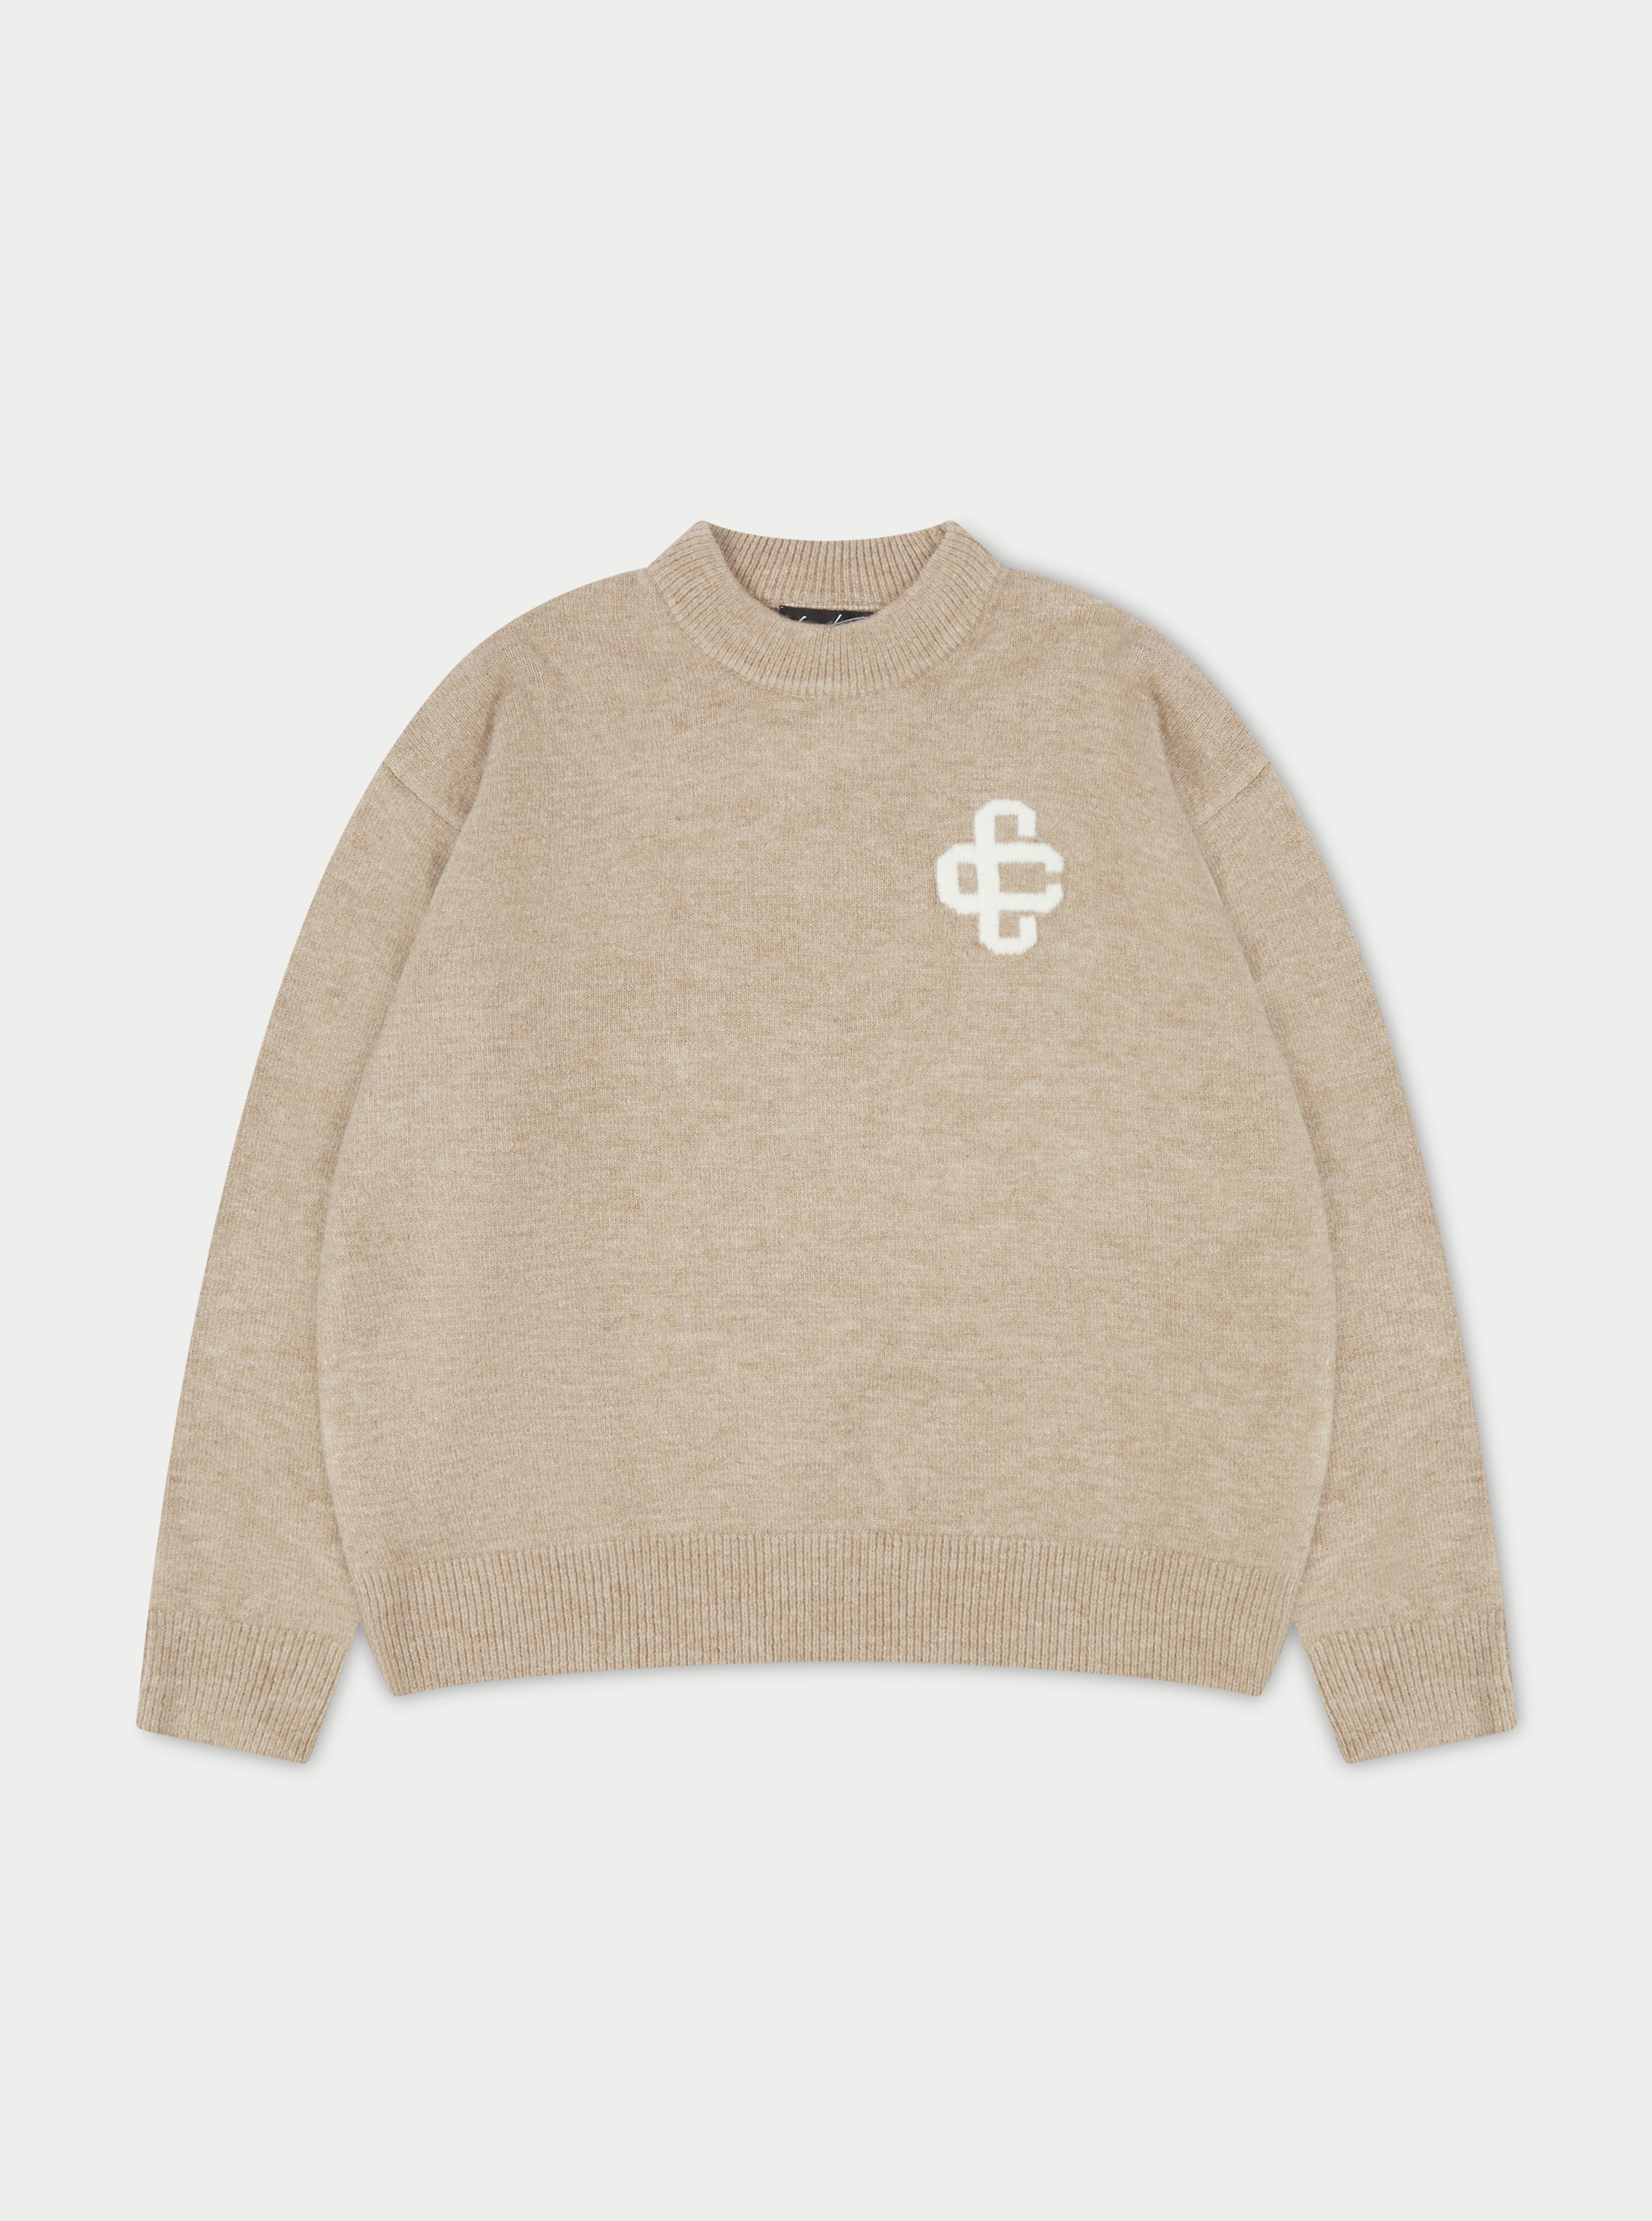 MEN'S SWEATSHIRTS – The Couture Club